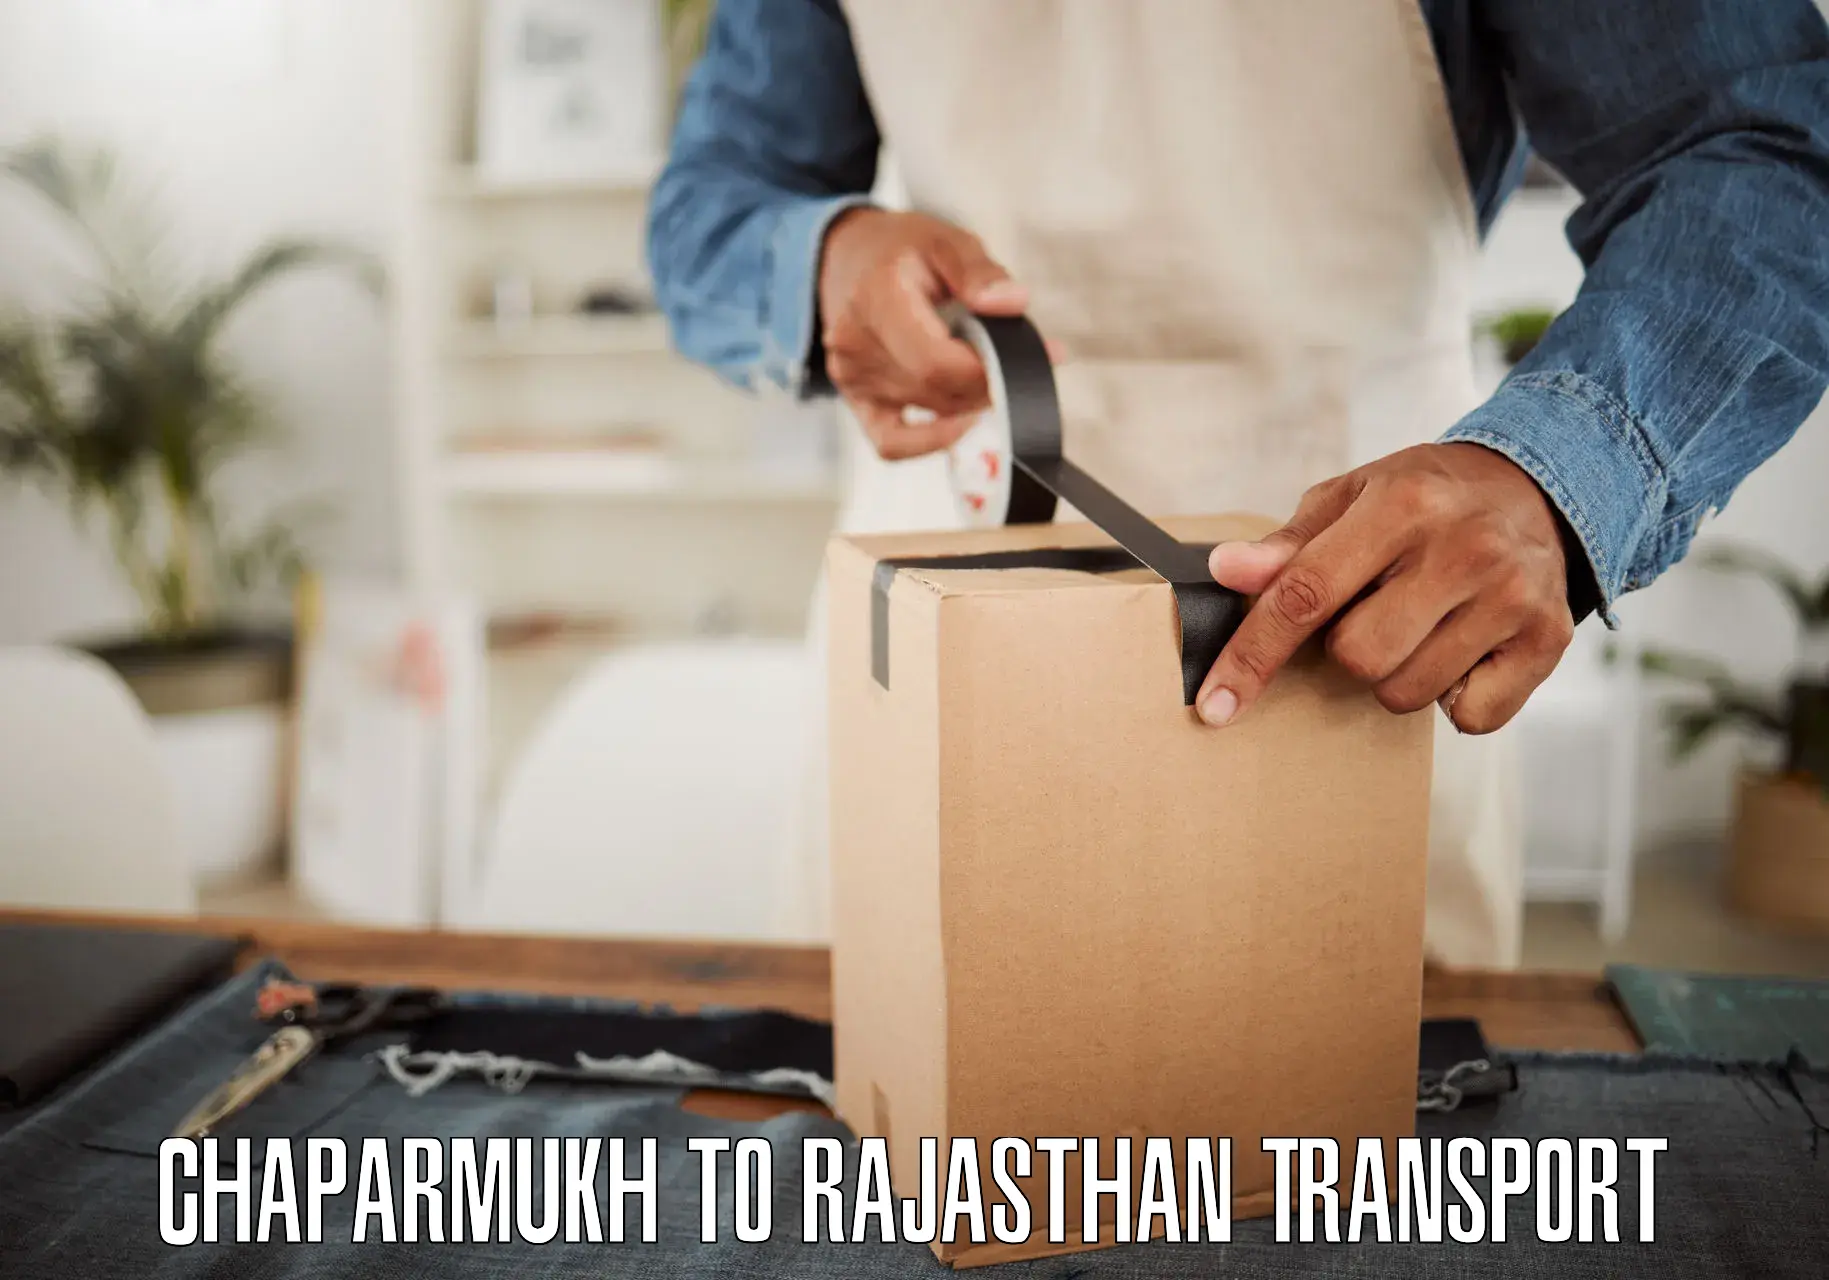 Road transport online services Chaparmukh to Jalore